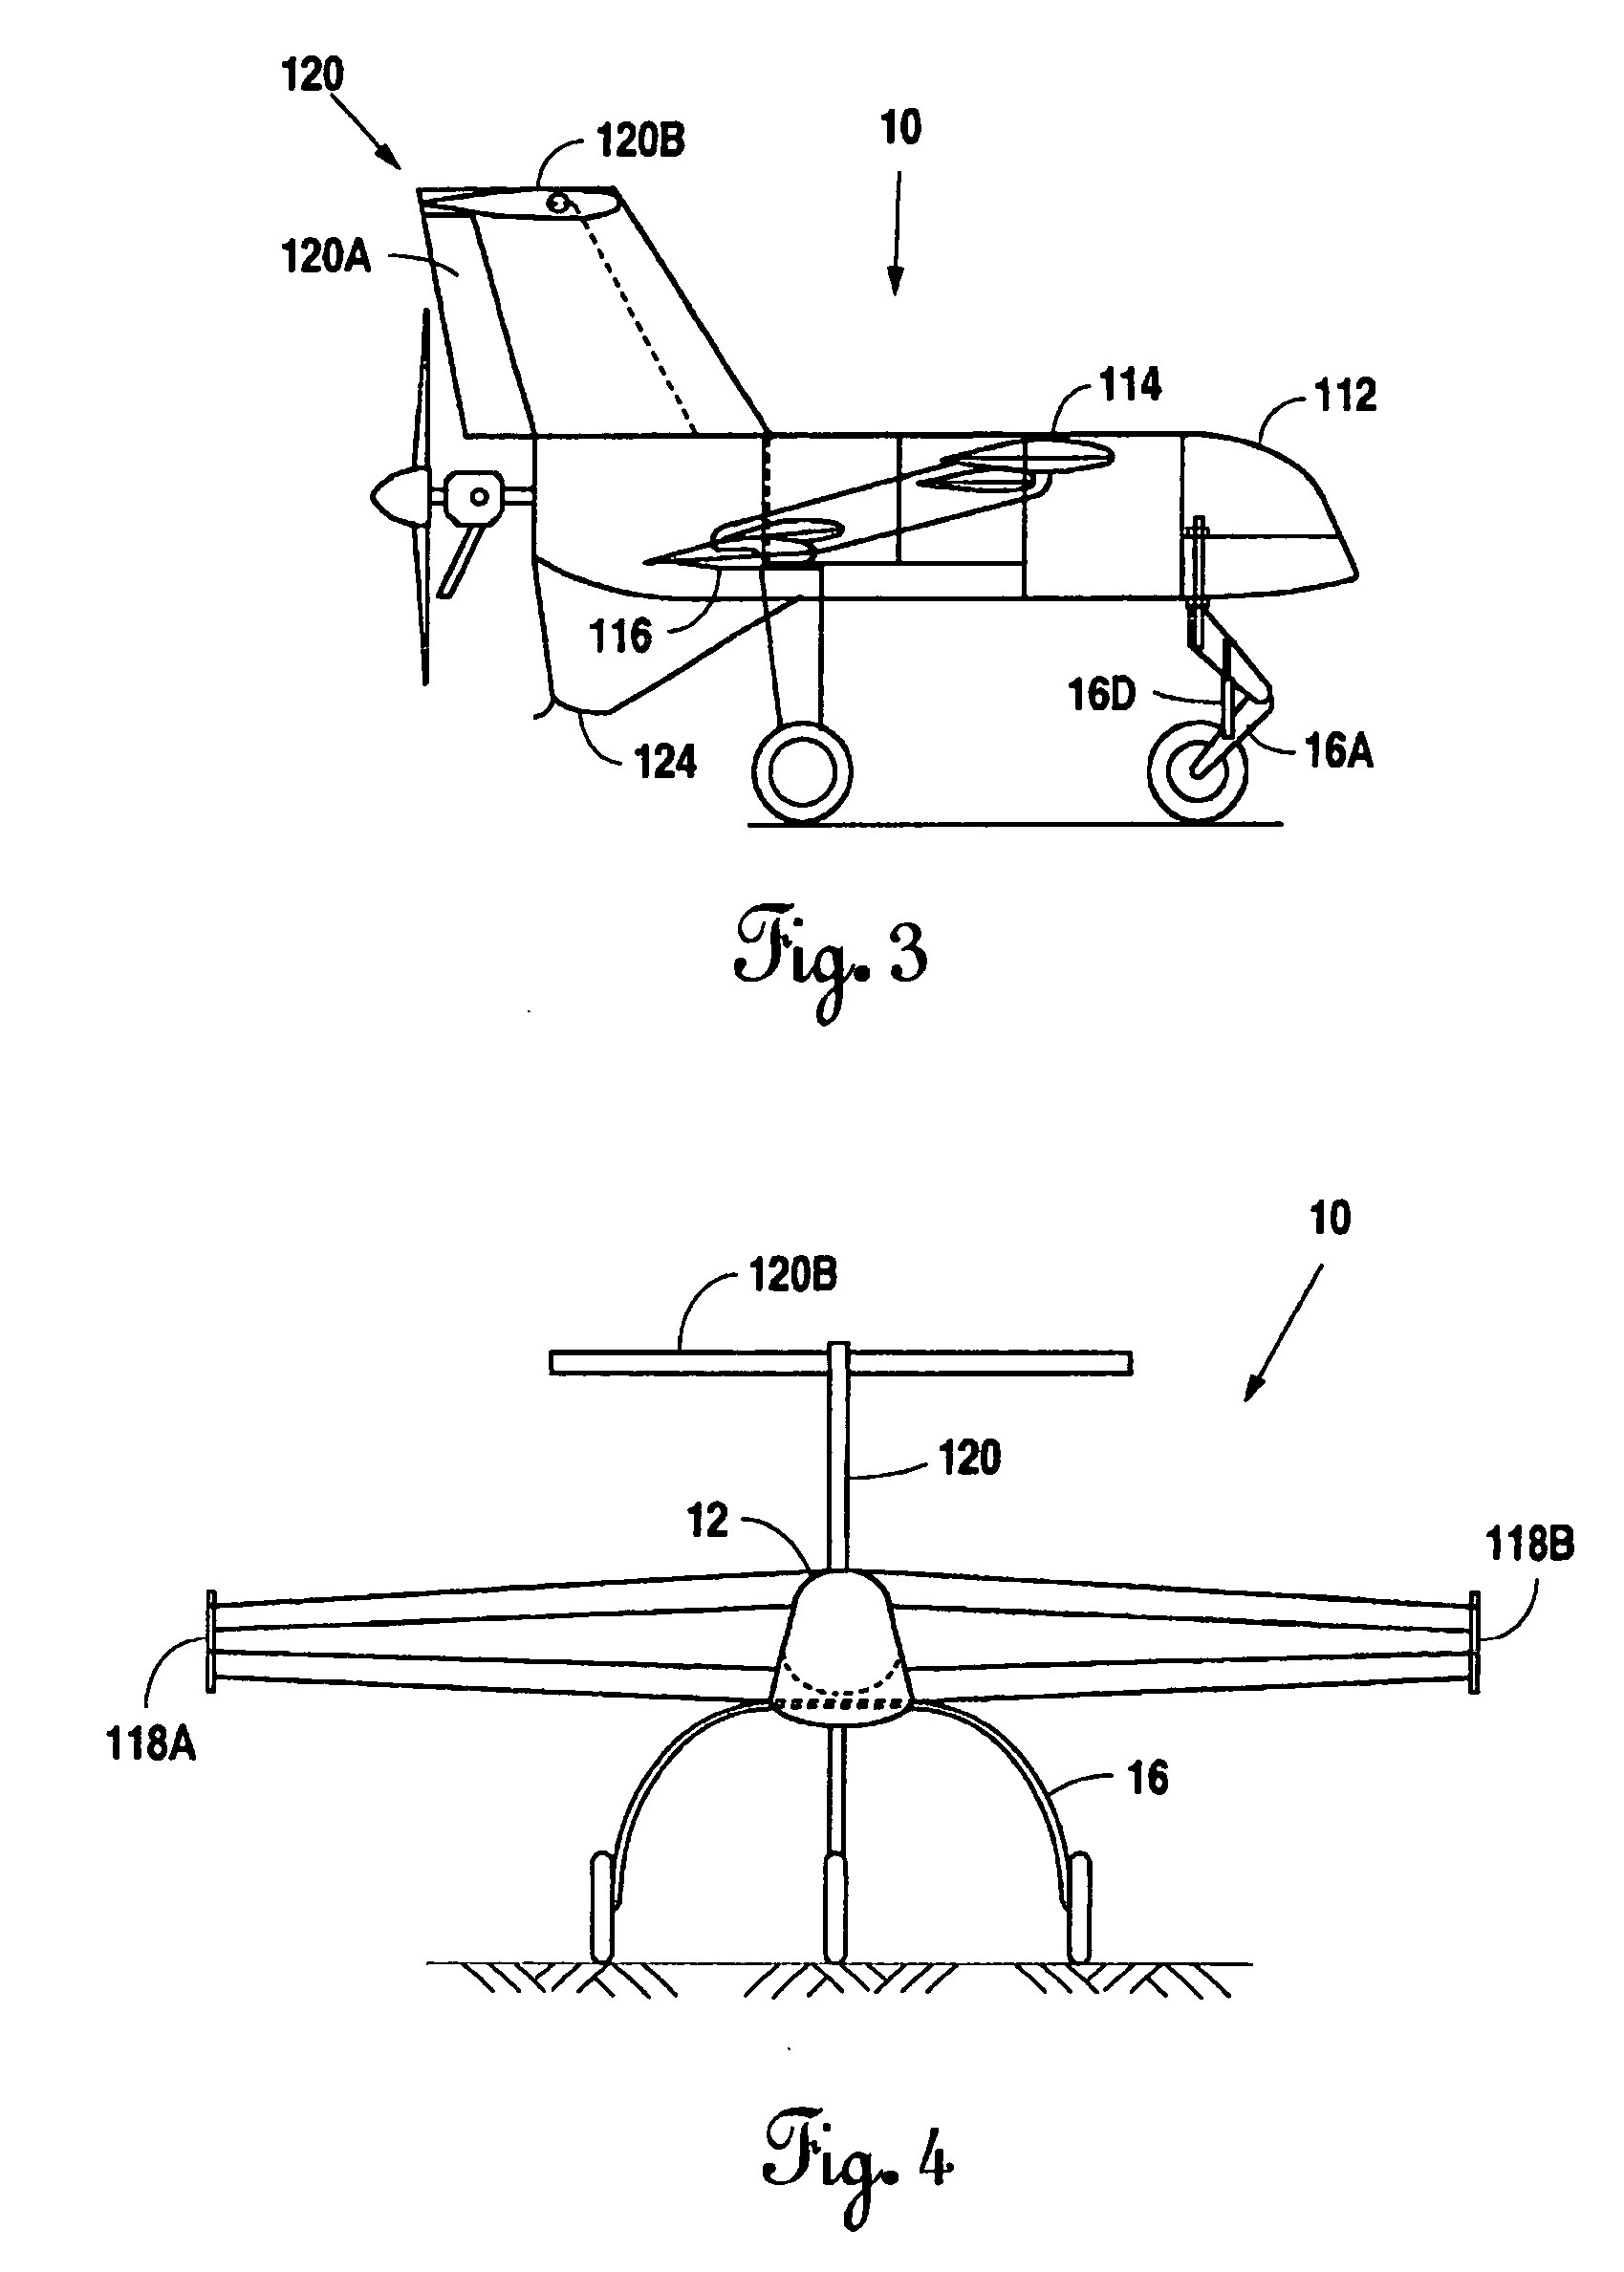 Unmanned biplane for airborne reconnaissance and surveillance having staggered and gapped wings